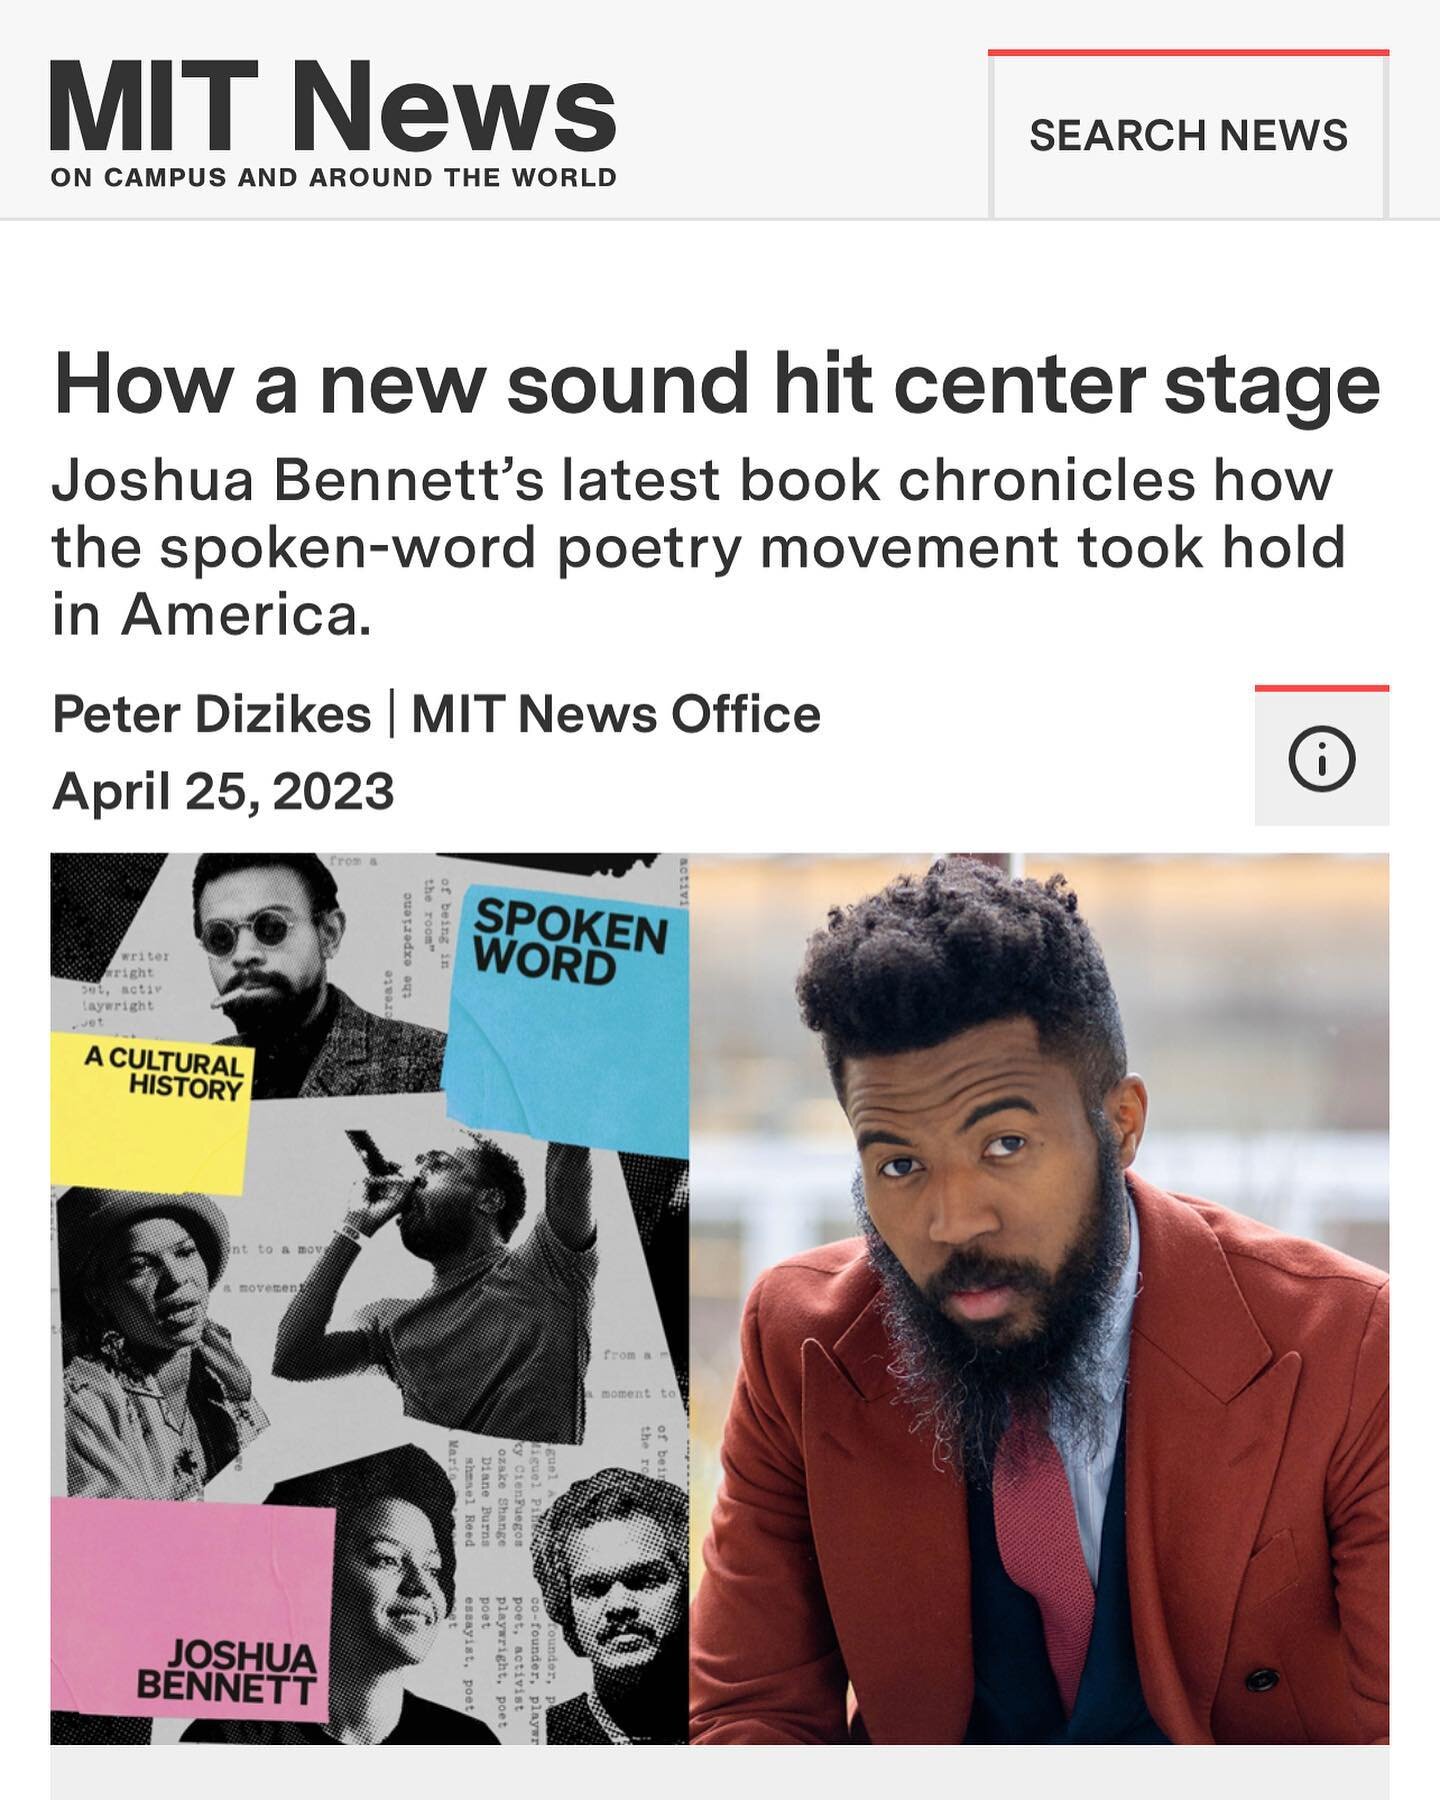 Special thanks to the good folks over at MIT News for today&rsquo;s article featuring Spoken Word: A Cultural History! And thanks to you all, as well, for your kind words over the past few days re: the new job. I&rsquo;m working on several public pro